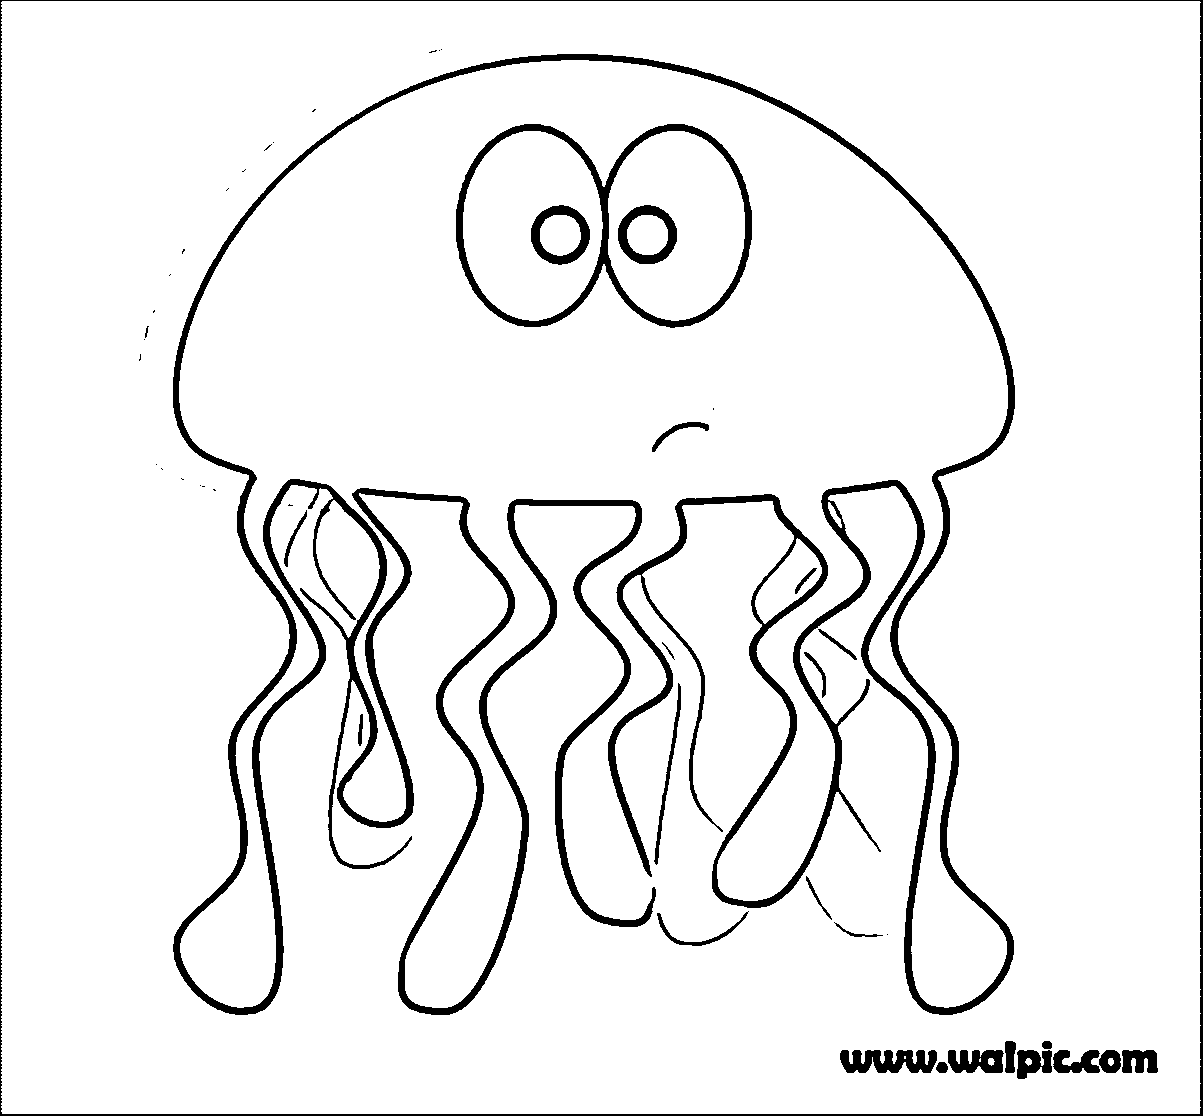 clipart for jellyfish - photo #24